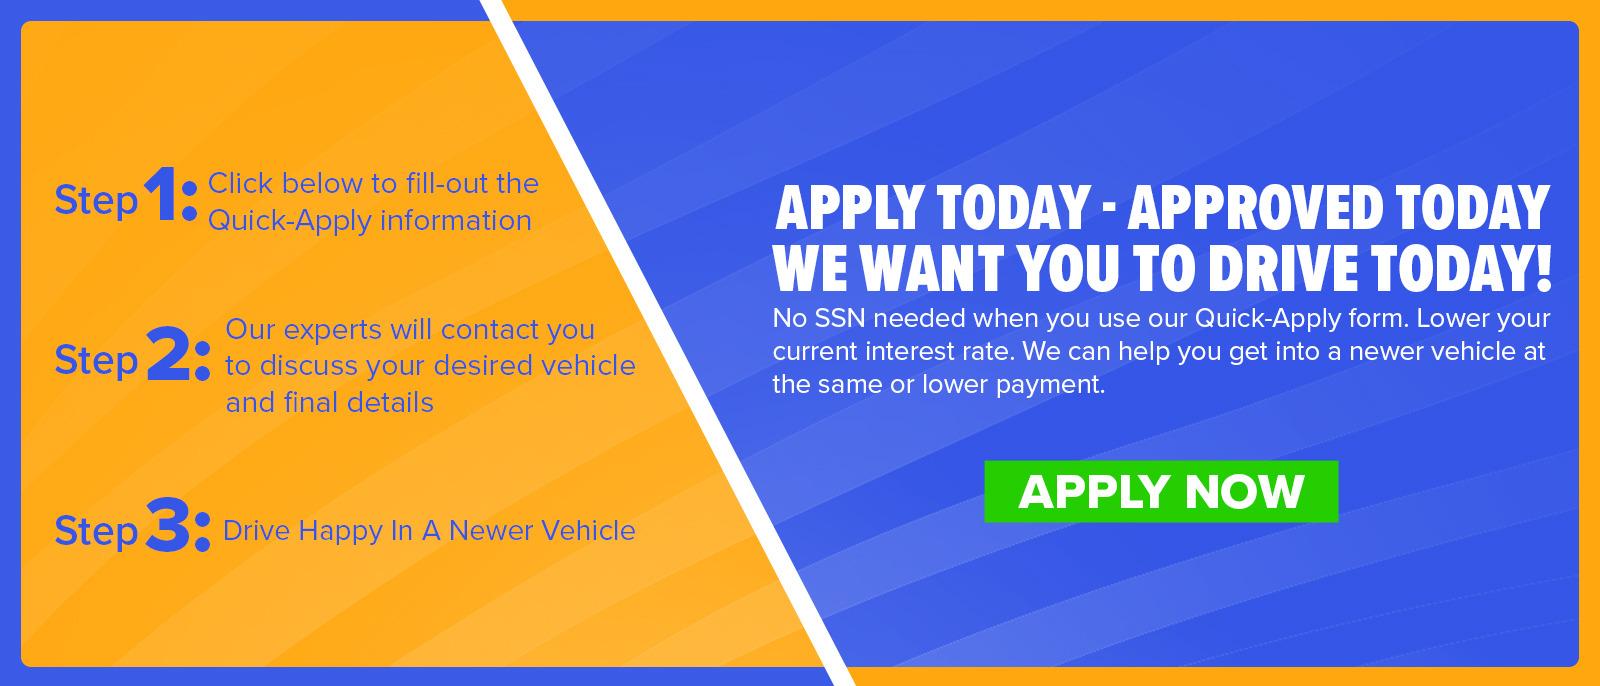 APPLY TODAY. APPROVED TODAY. WE WANT YOU TO DRIVE TODAY!